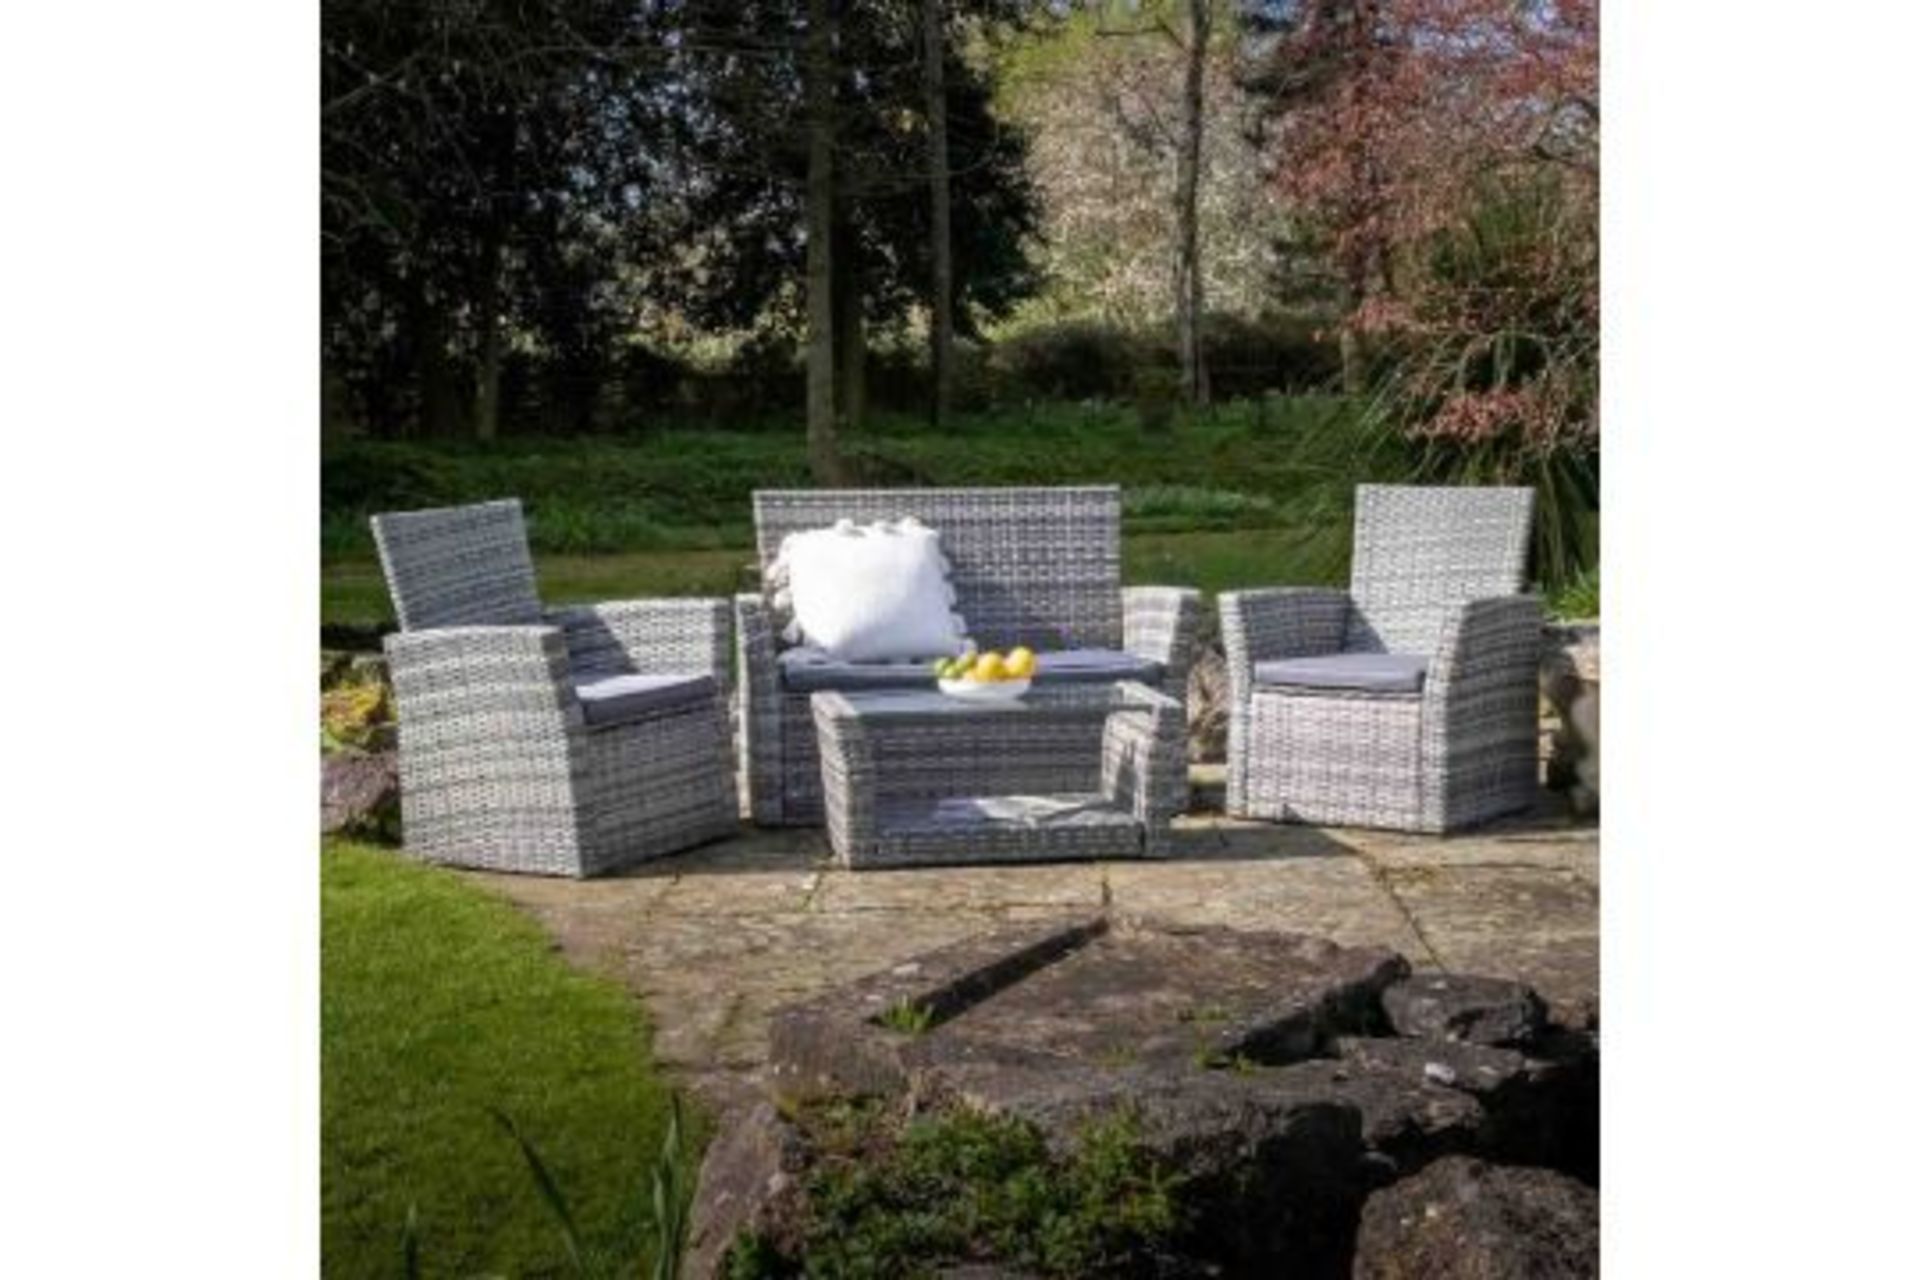 TRADE LOT 4 X New Boxed Corfo 4 Seater Garden Furniture Set in Grey. The 4-piece garden furniture